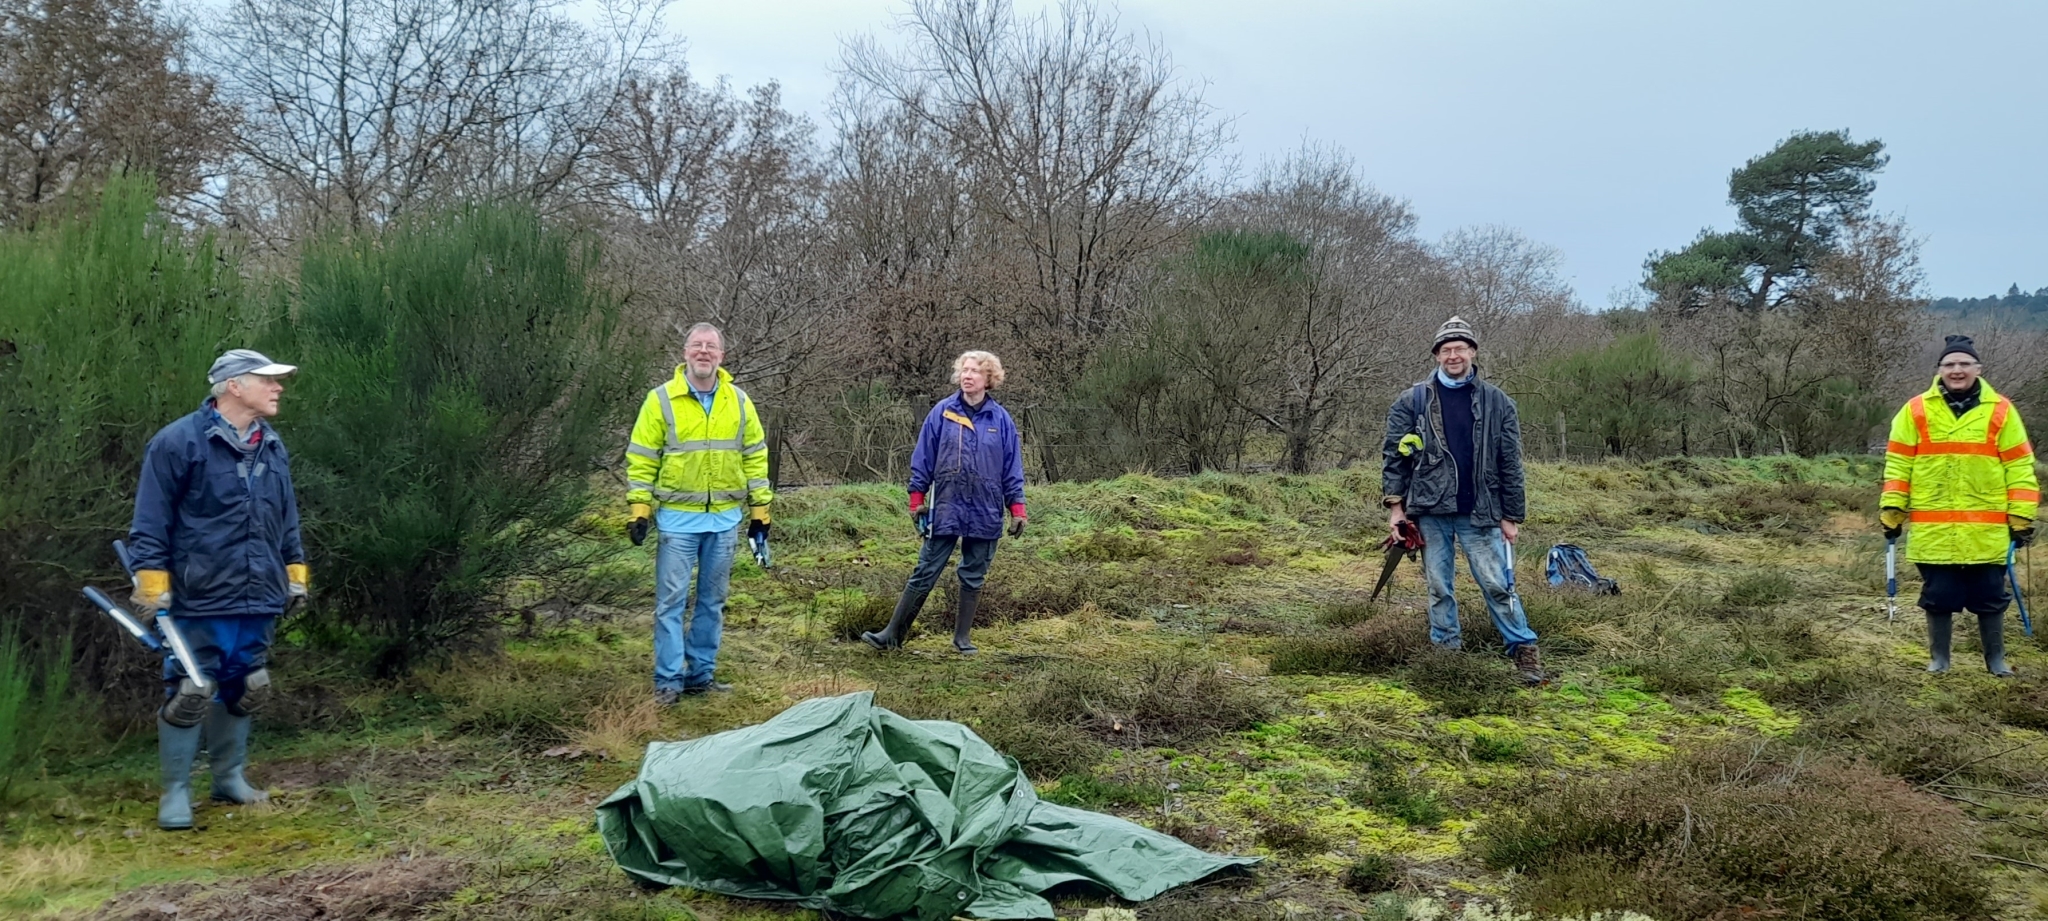 A photo from the FoTF Conservation Event - December 2020 - Broom Removal at Santon Street, Santon Downham : Group photo of some of the socially distanced volunteers